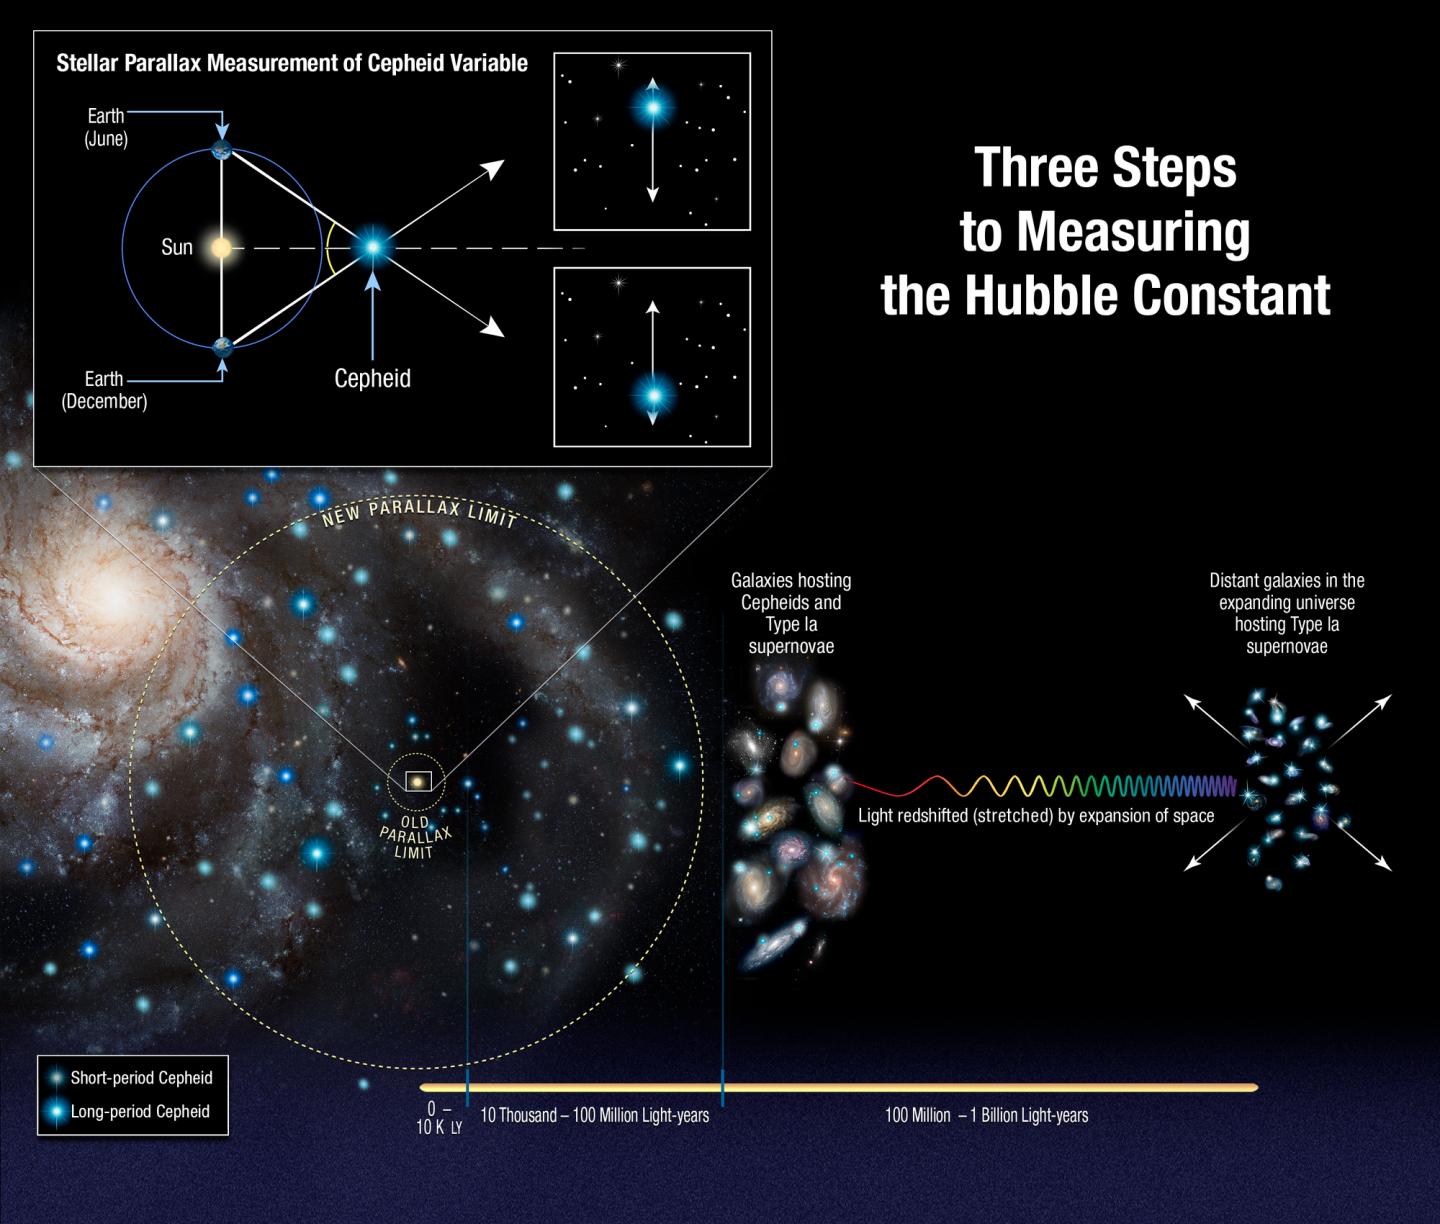 Measuring the Hubble Constant